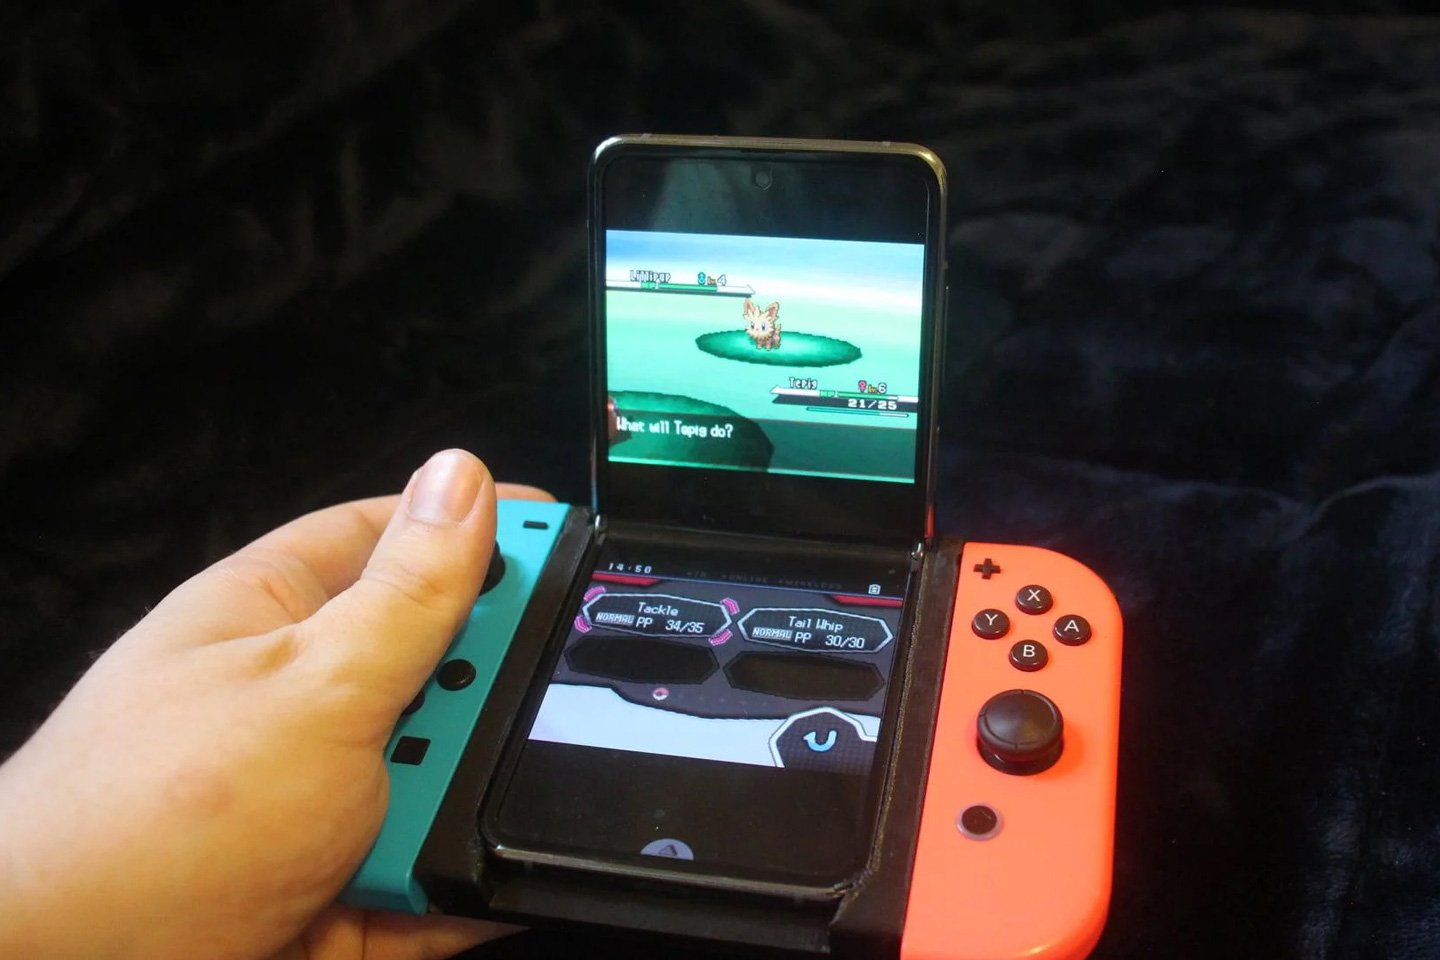 Samsung Galaxy Z Flip with Nintendo Switch Joy-Cons is the crossover we  didn't know we needed - Yanko Design